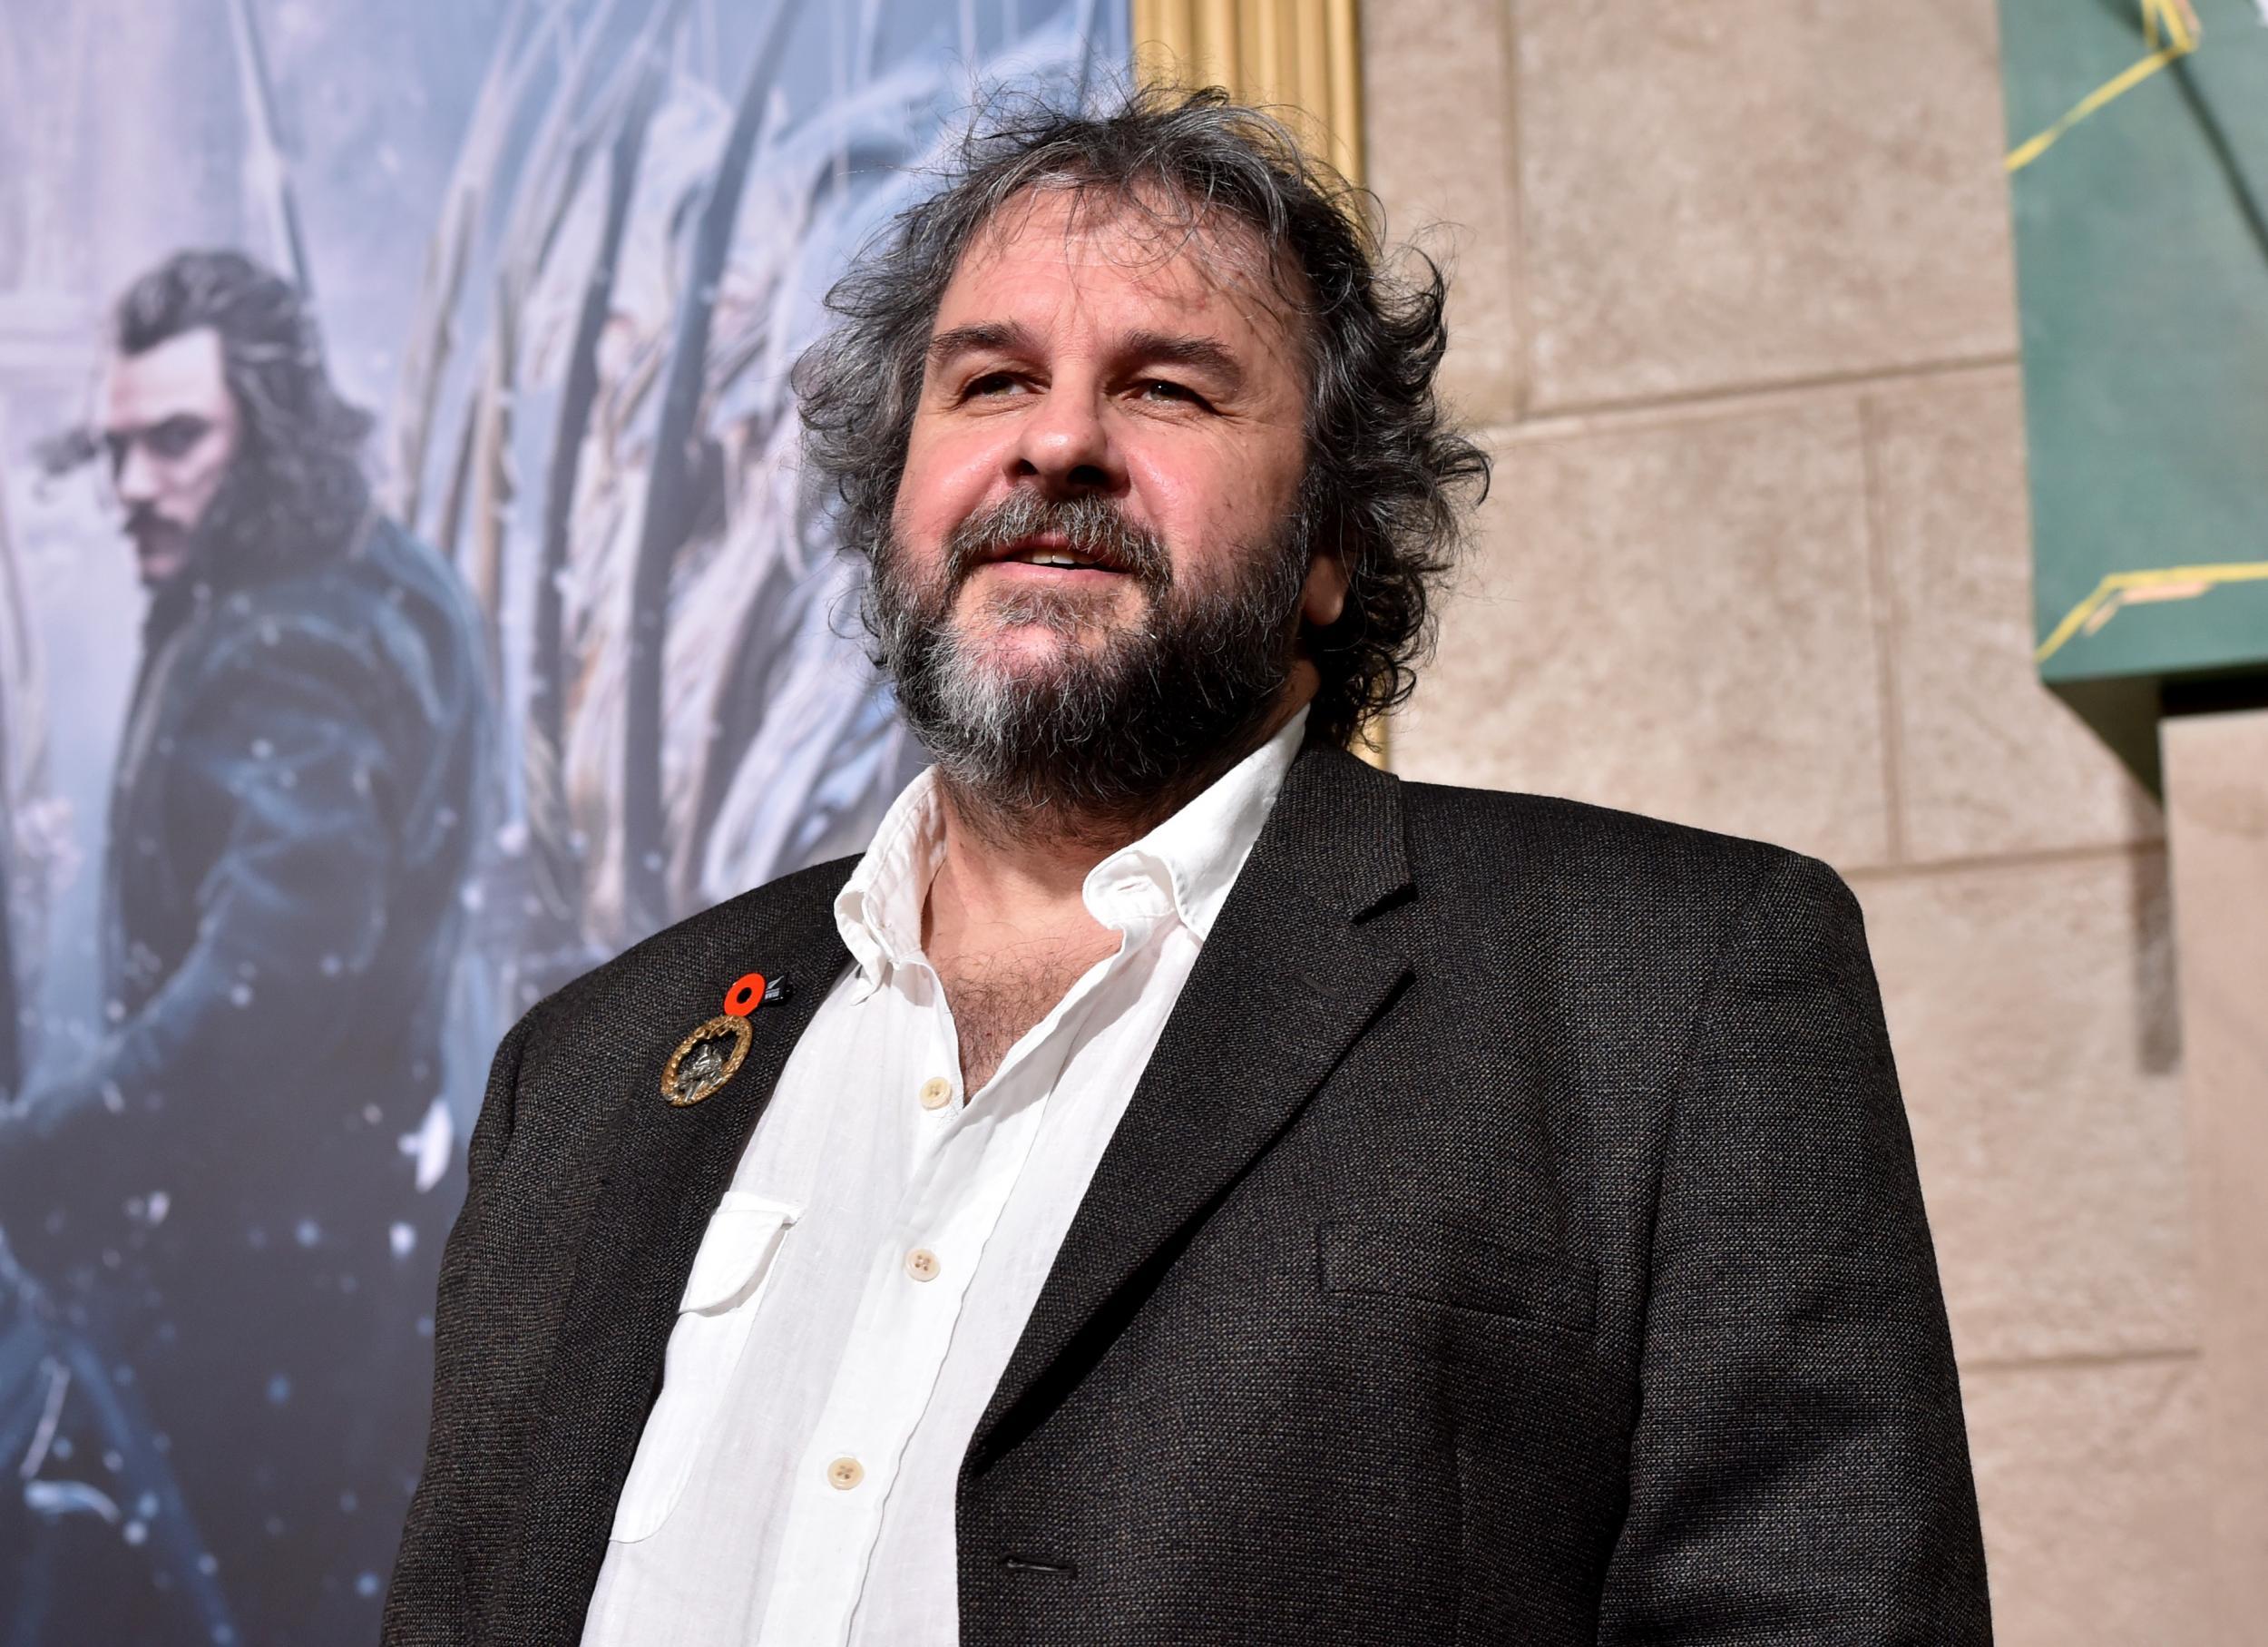 Peter Jackson revealed he had not cast Ashley Judd and Mira Sorvino after pressure from Harvey Weinstein